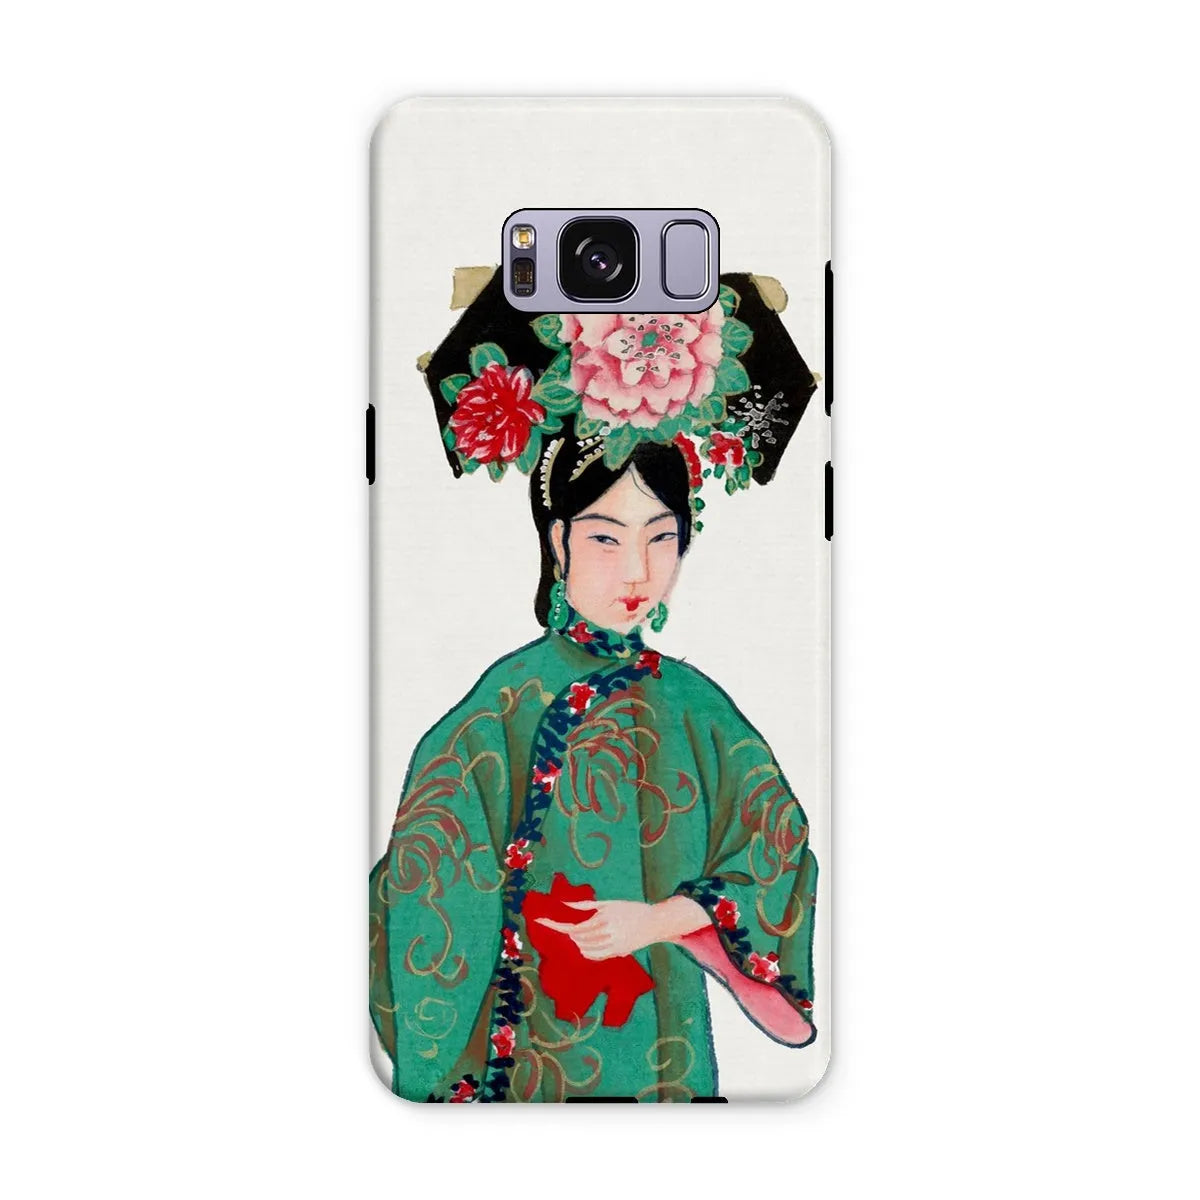 Chinese Noblewoman In Manchu Couture Art Phone Case - Samsung Galaxy S8 Plus / Matte - Mobile Phone Cases - Aesthetic